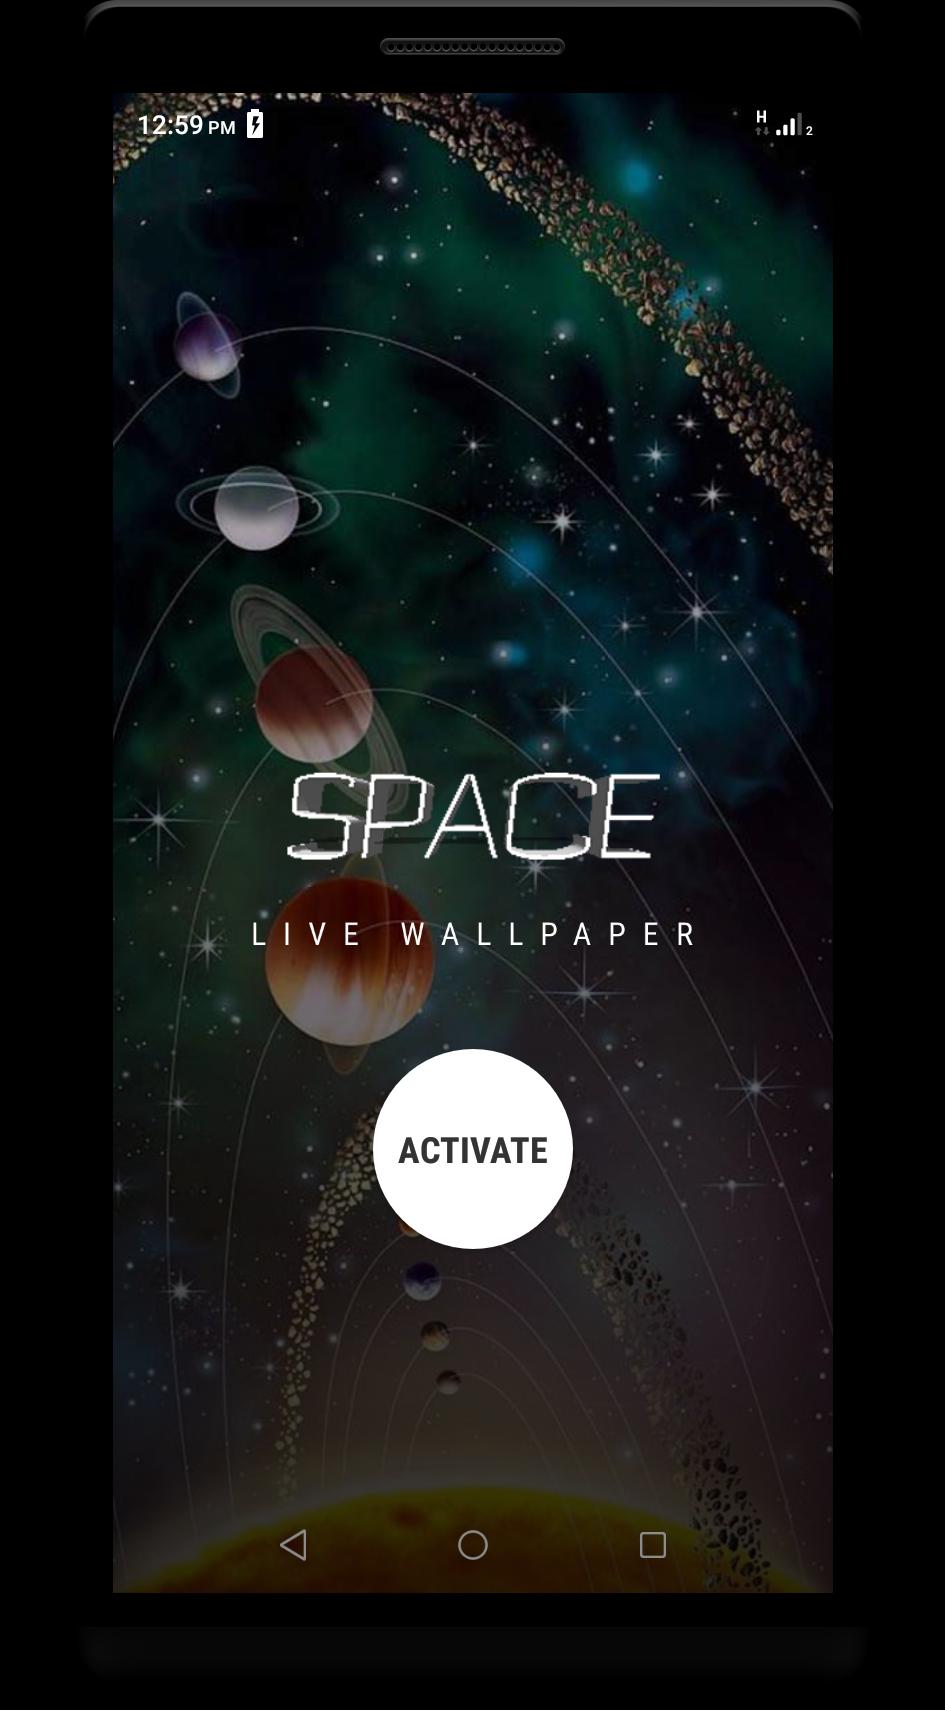 Android 用の Space Live Wallpaper By Nasa Galaxy Rediscovery Apk をダウンロード